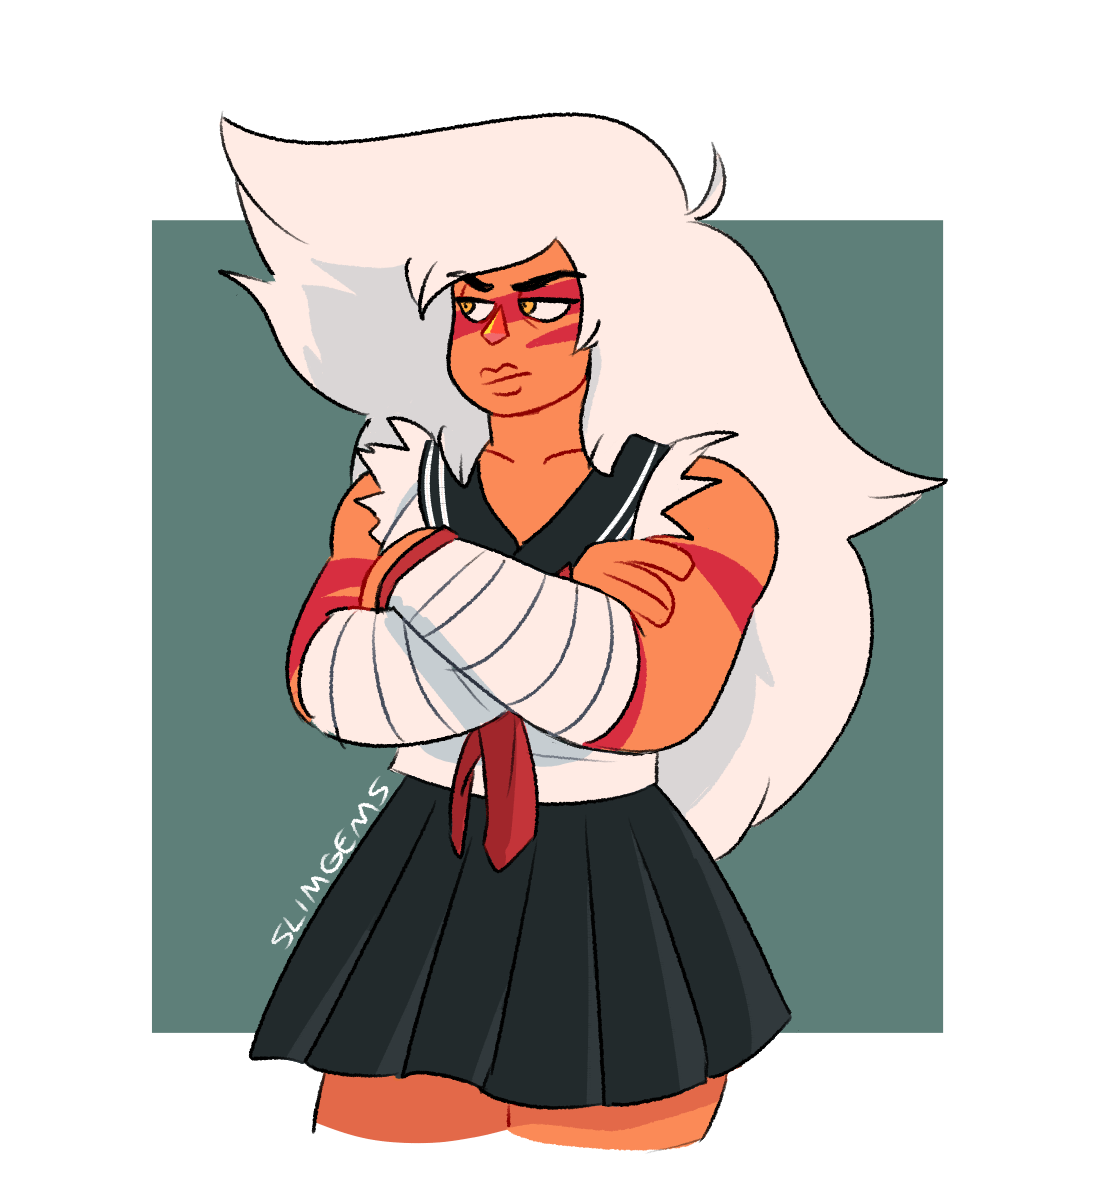 quick jasp as sakura oogami (objectively the best character in the entire danganronpa franchise)